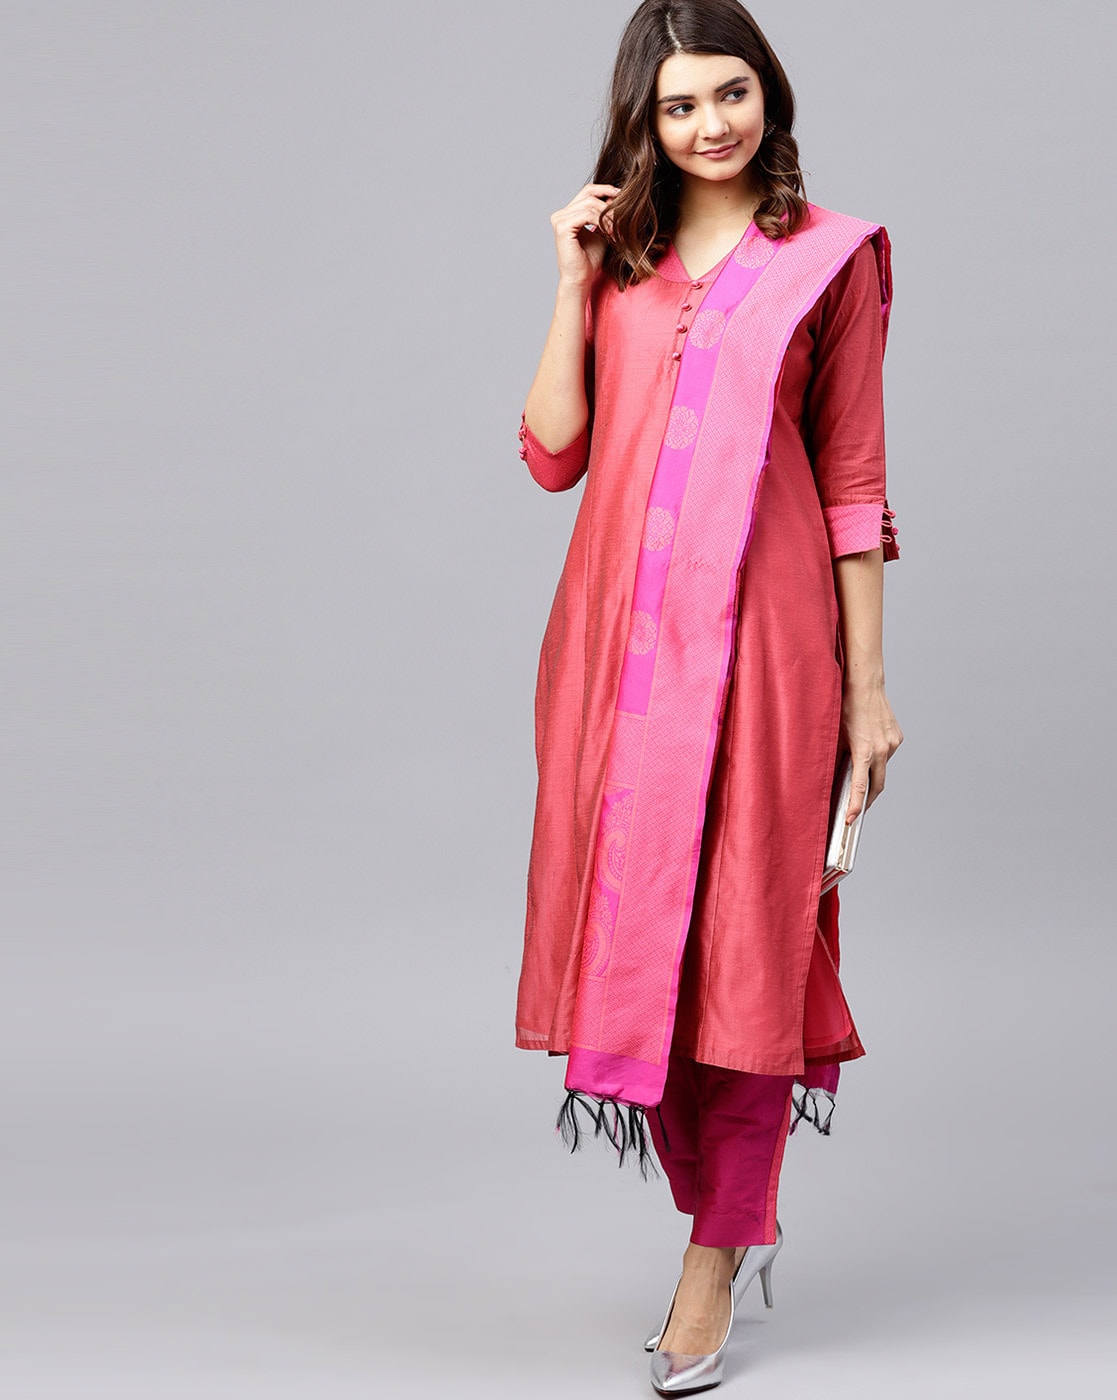 Formal Kurti For Interview Myntra Big Sales | www.gorgeousgeorge.co